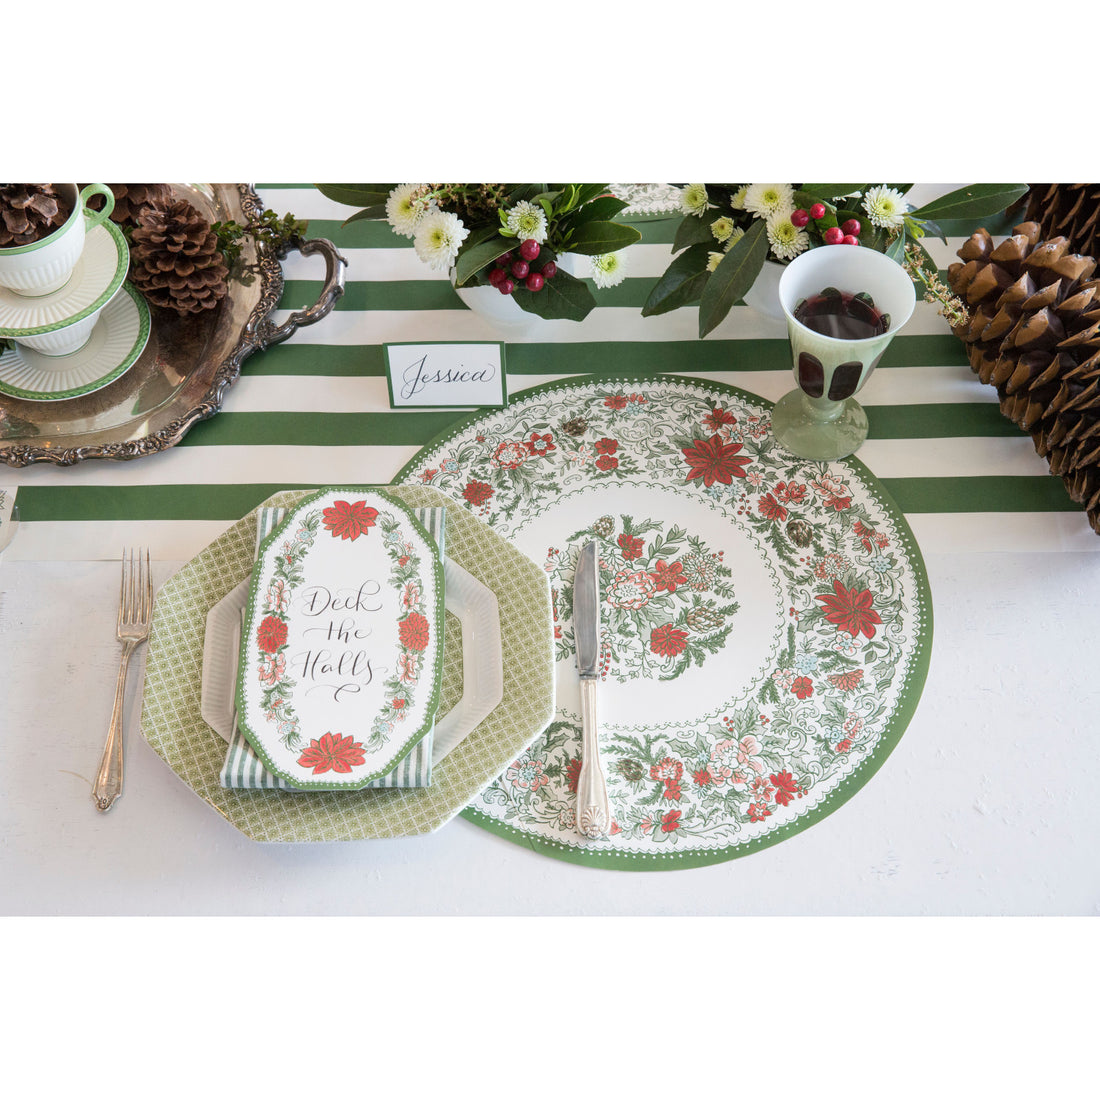 The Die-cut Christmas China Placemat under a festive Christmas place setting.